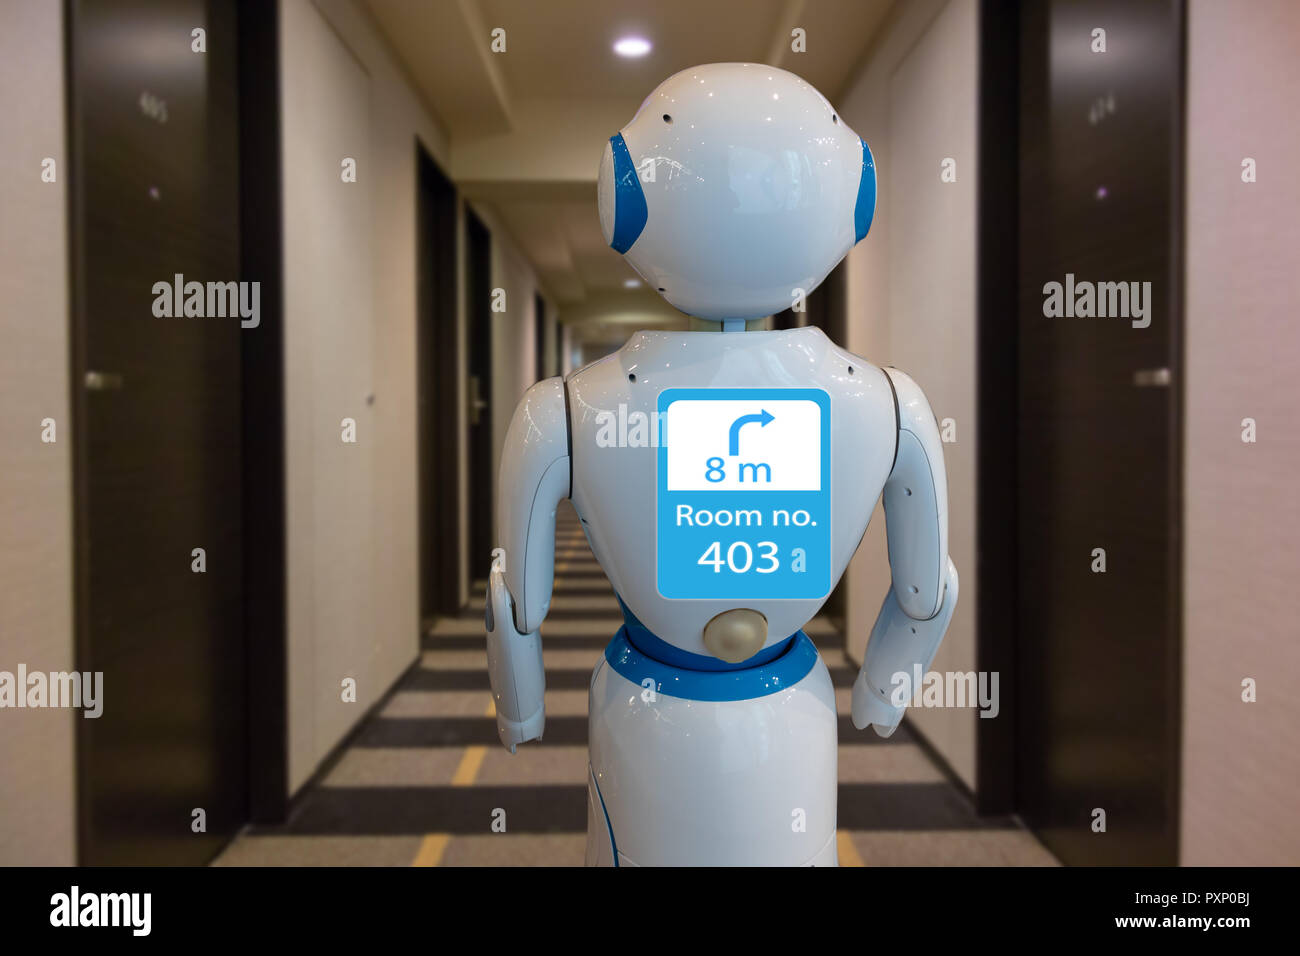 smart hotel in hospitality industry 4.0 technology concept, robot butler ( robot assistant) use for greet arriving guests, deliver customer, items to  r Stock Photo - Alamy